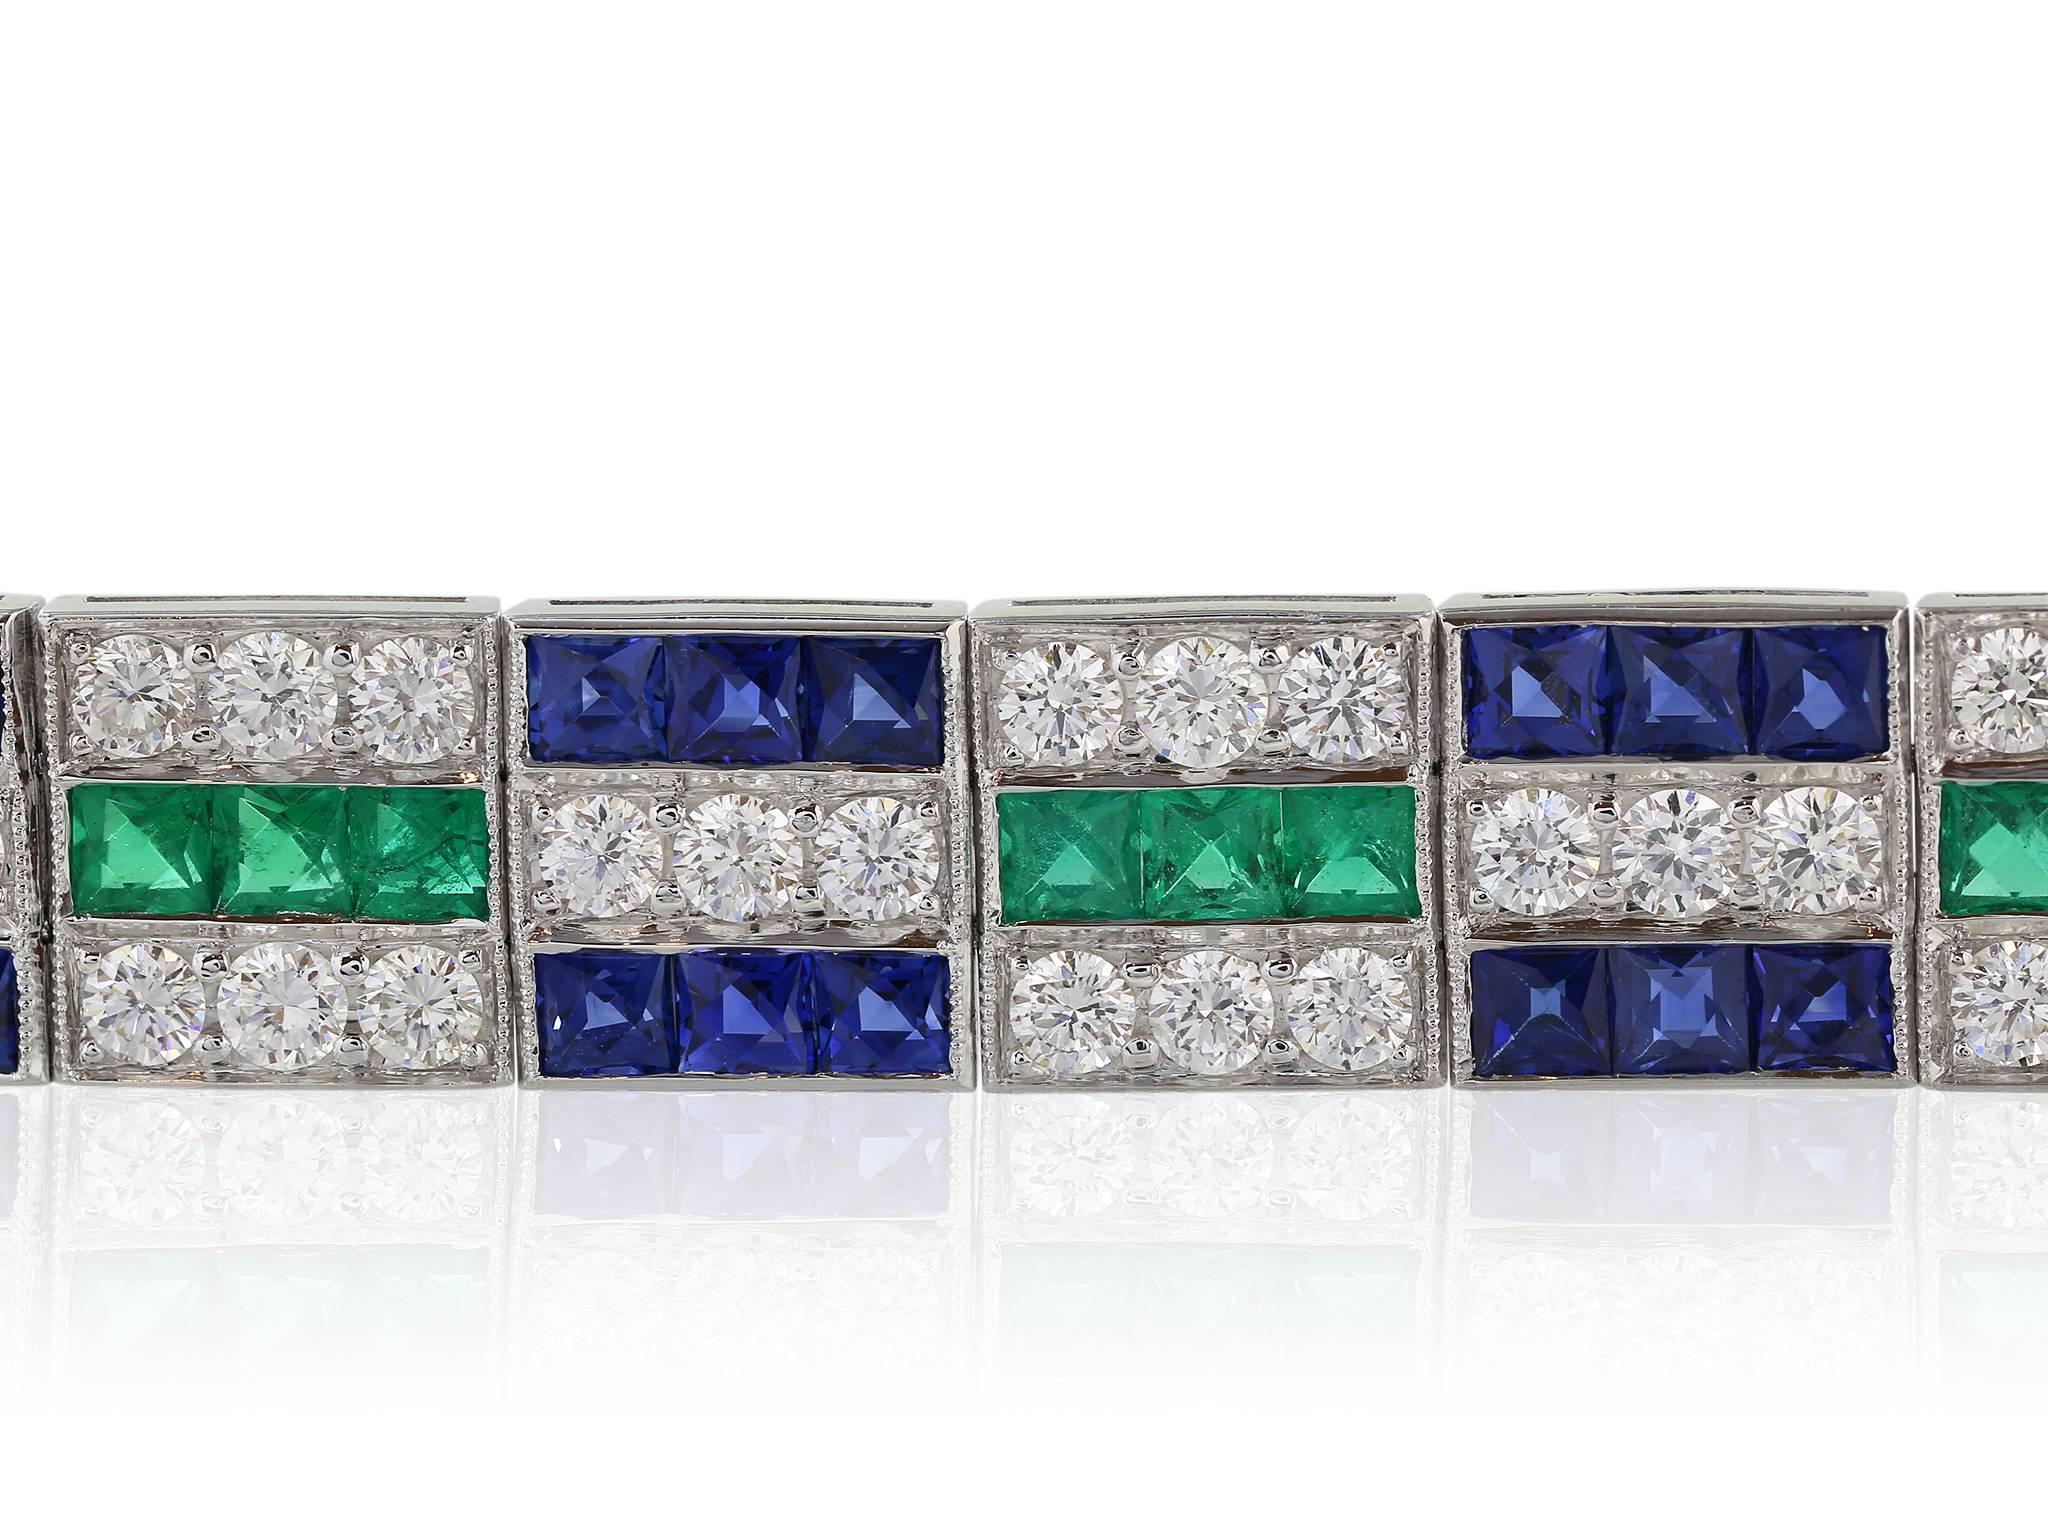 Platinum Art Deco style bracelet consisting of 60 sapphire having a total weight of 9.59 carats, 90 full cut diamonds having a total weight of 4.97 carats and 30 square cut emeralds having a total weight of 3.70 carats.